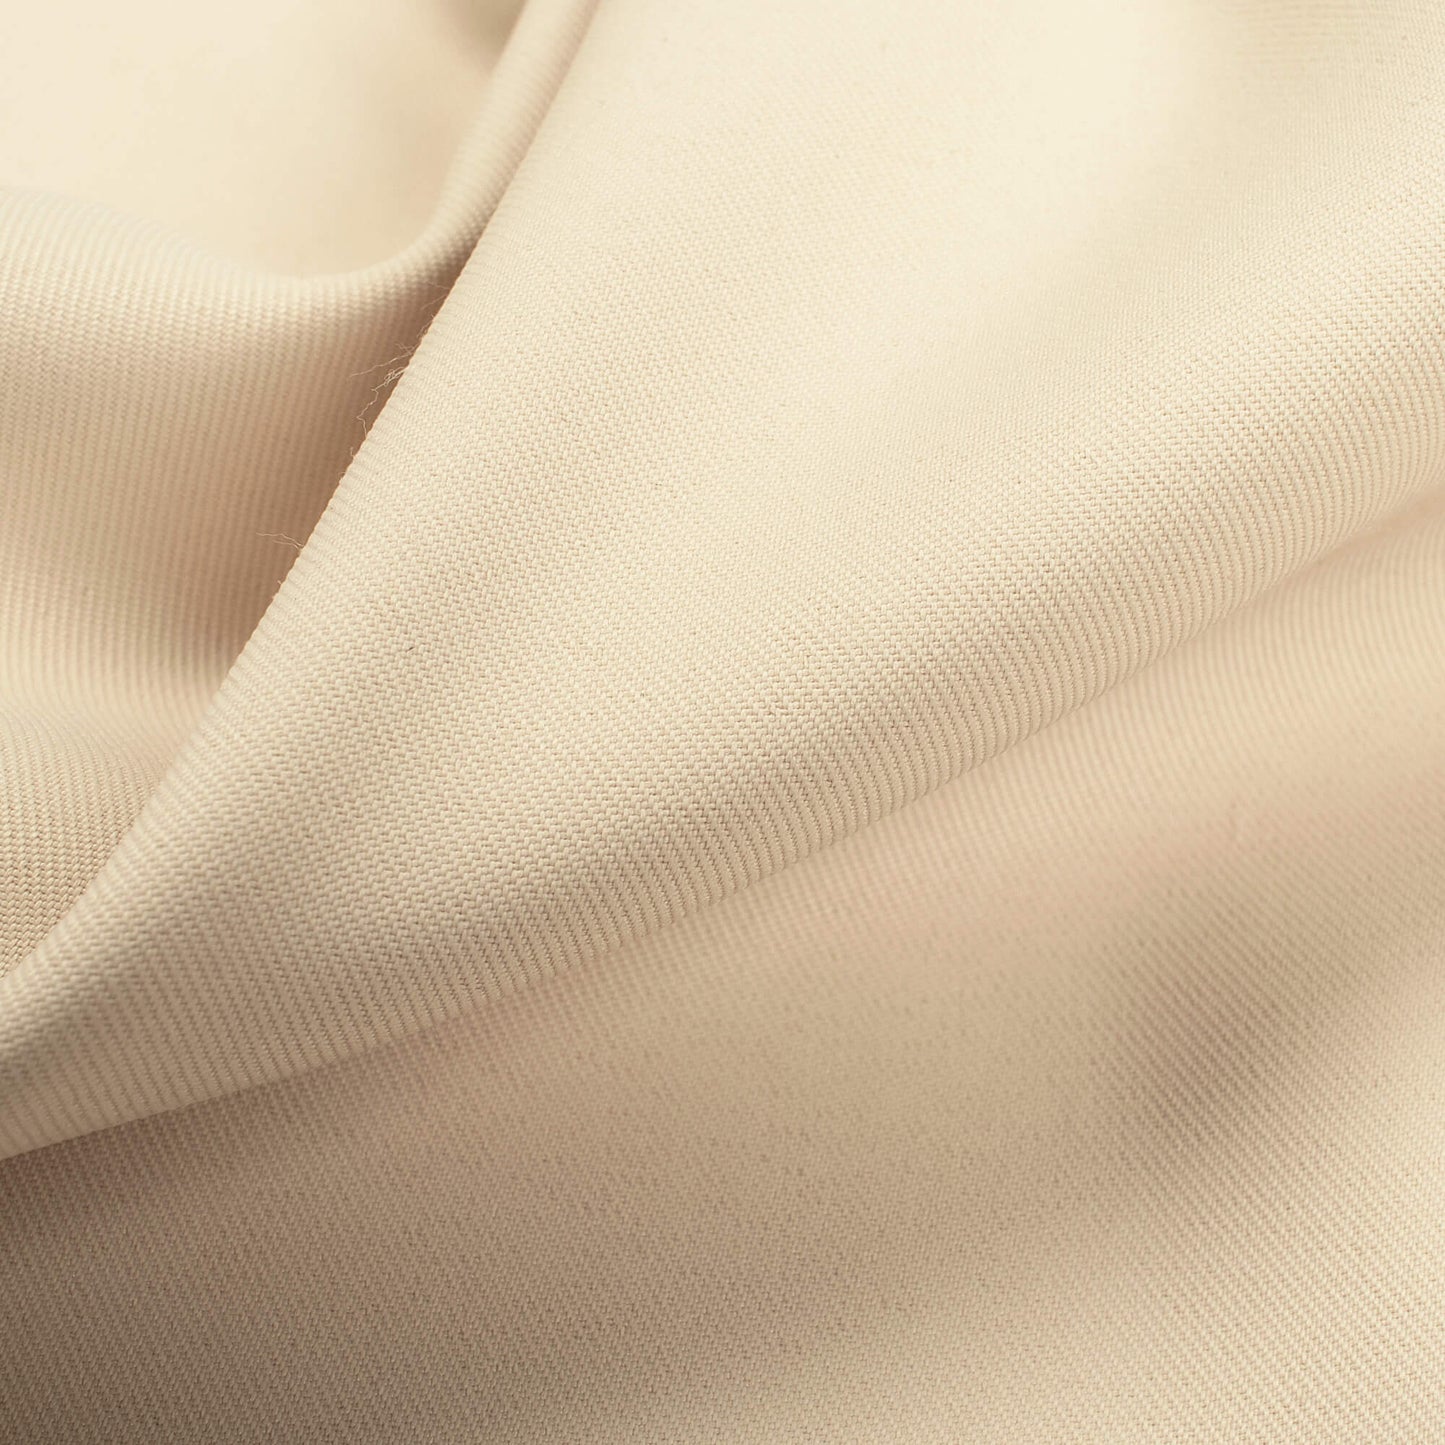 Ivory Cream Plain Luxury Suiting Fabric (Width 58 Inches)